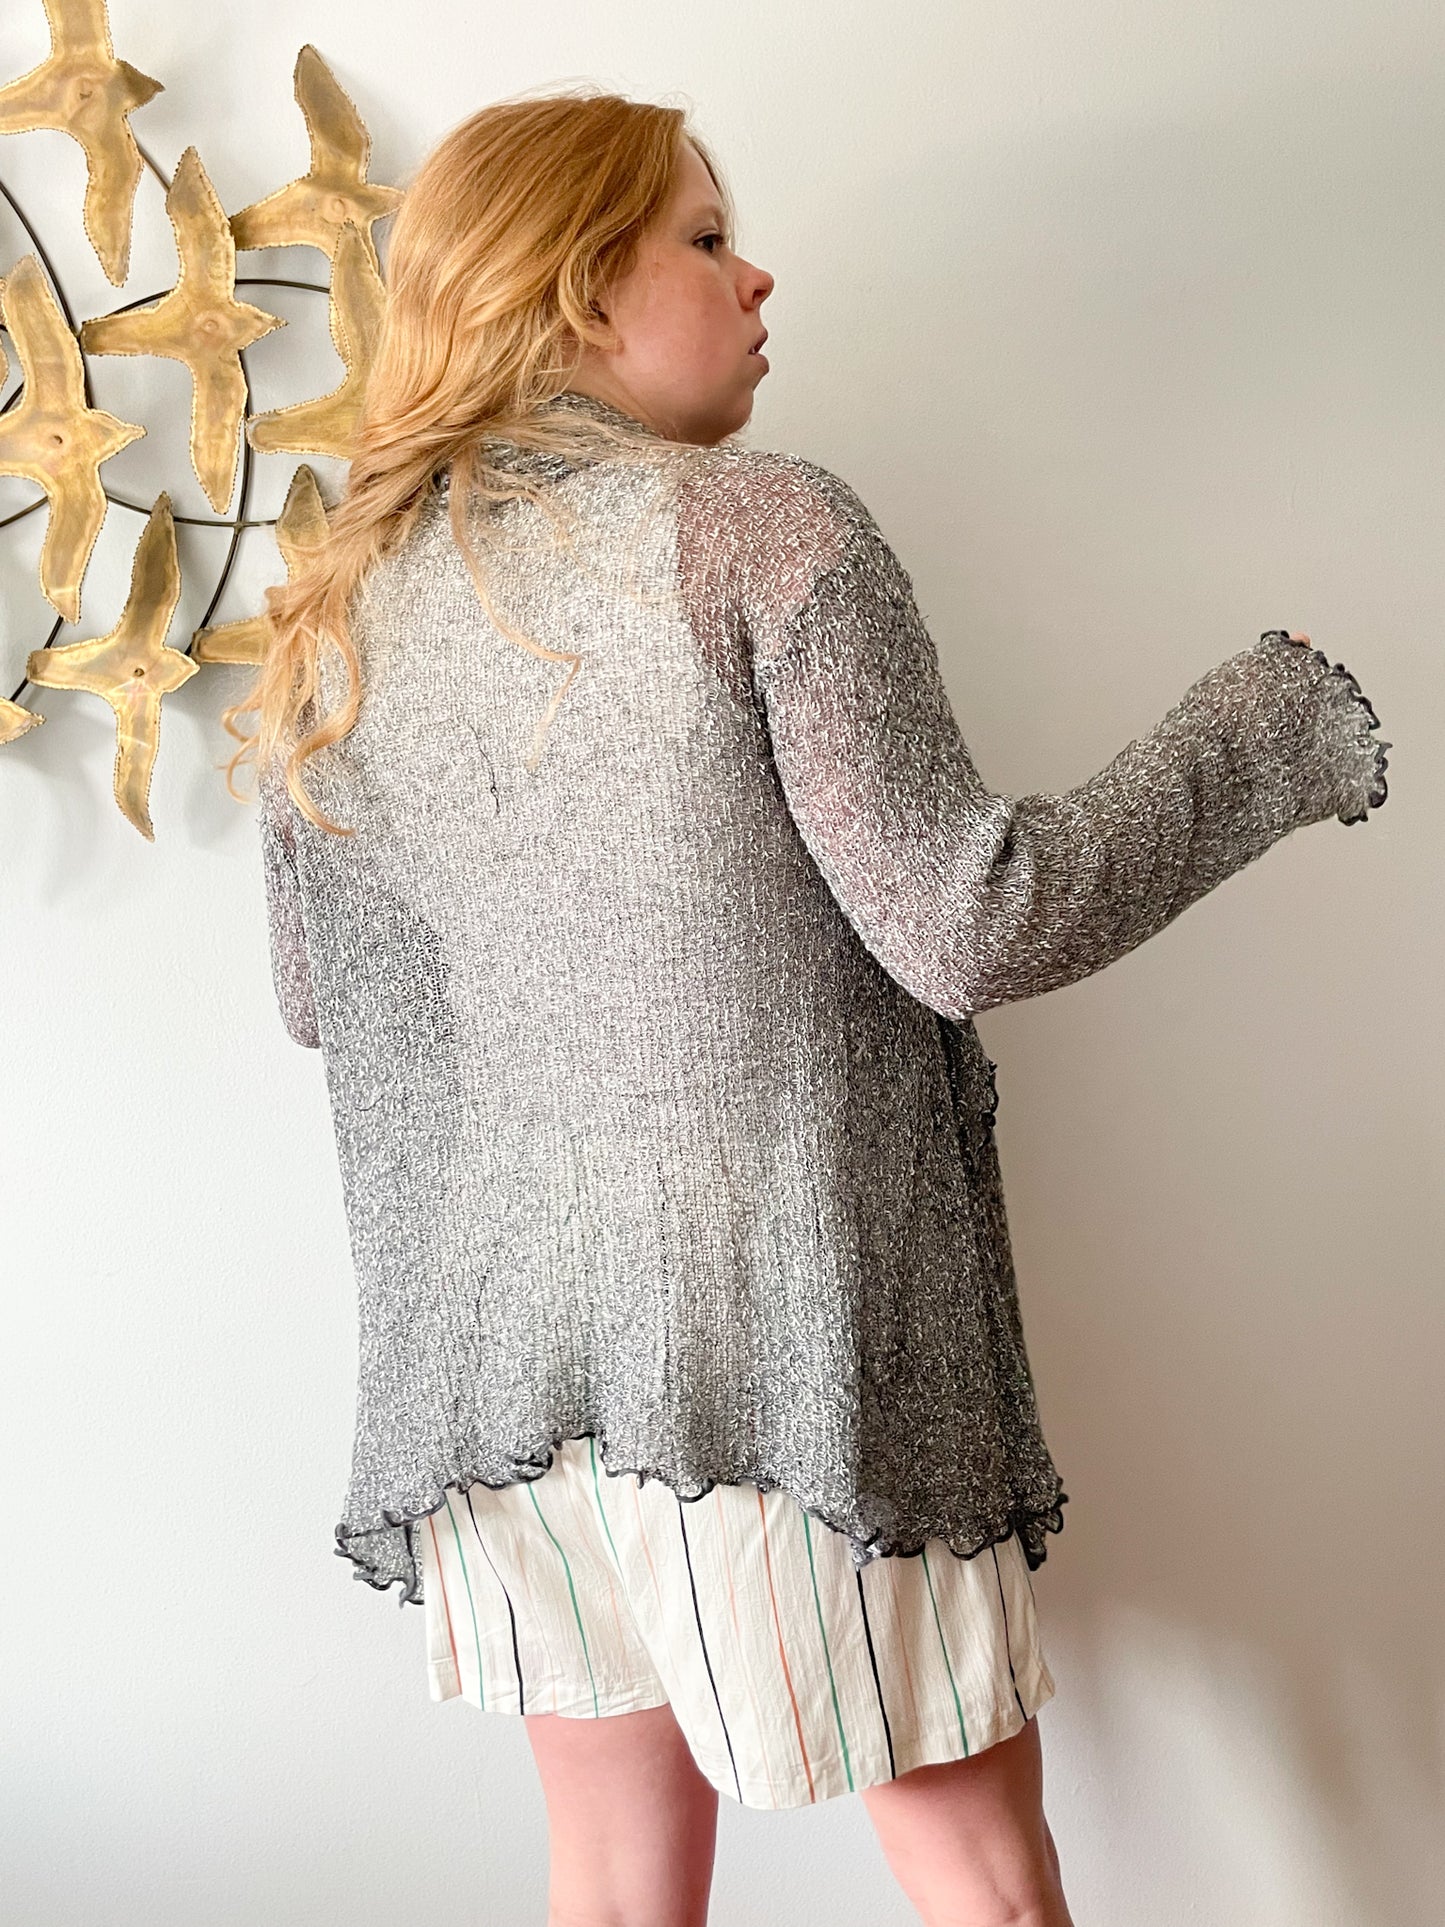 Sharanel Grey Knit Relaxed Open Cardigan Sweater - One Size